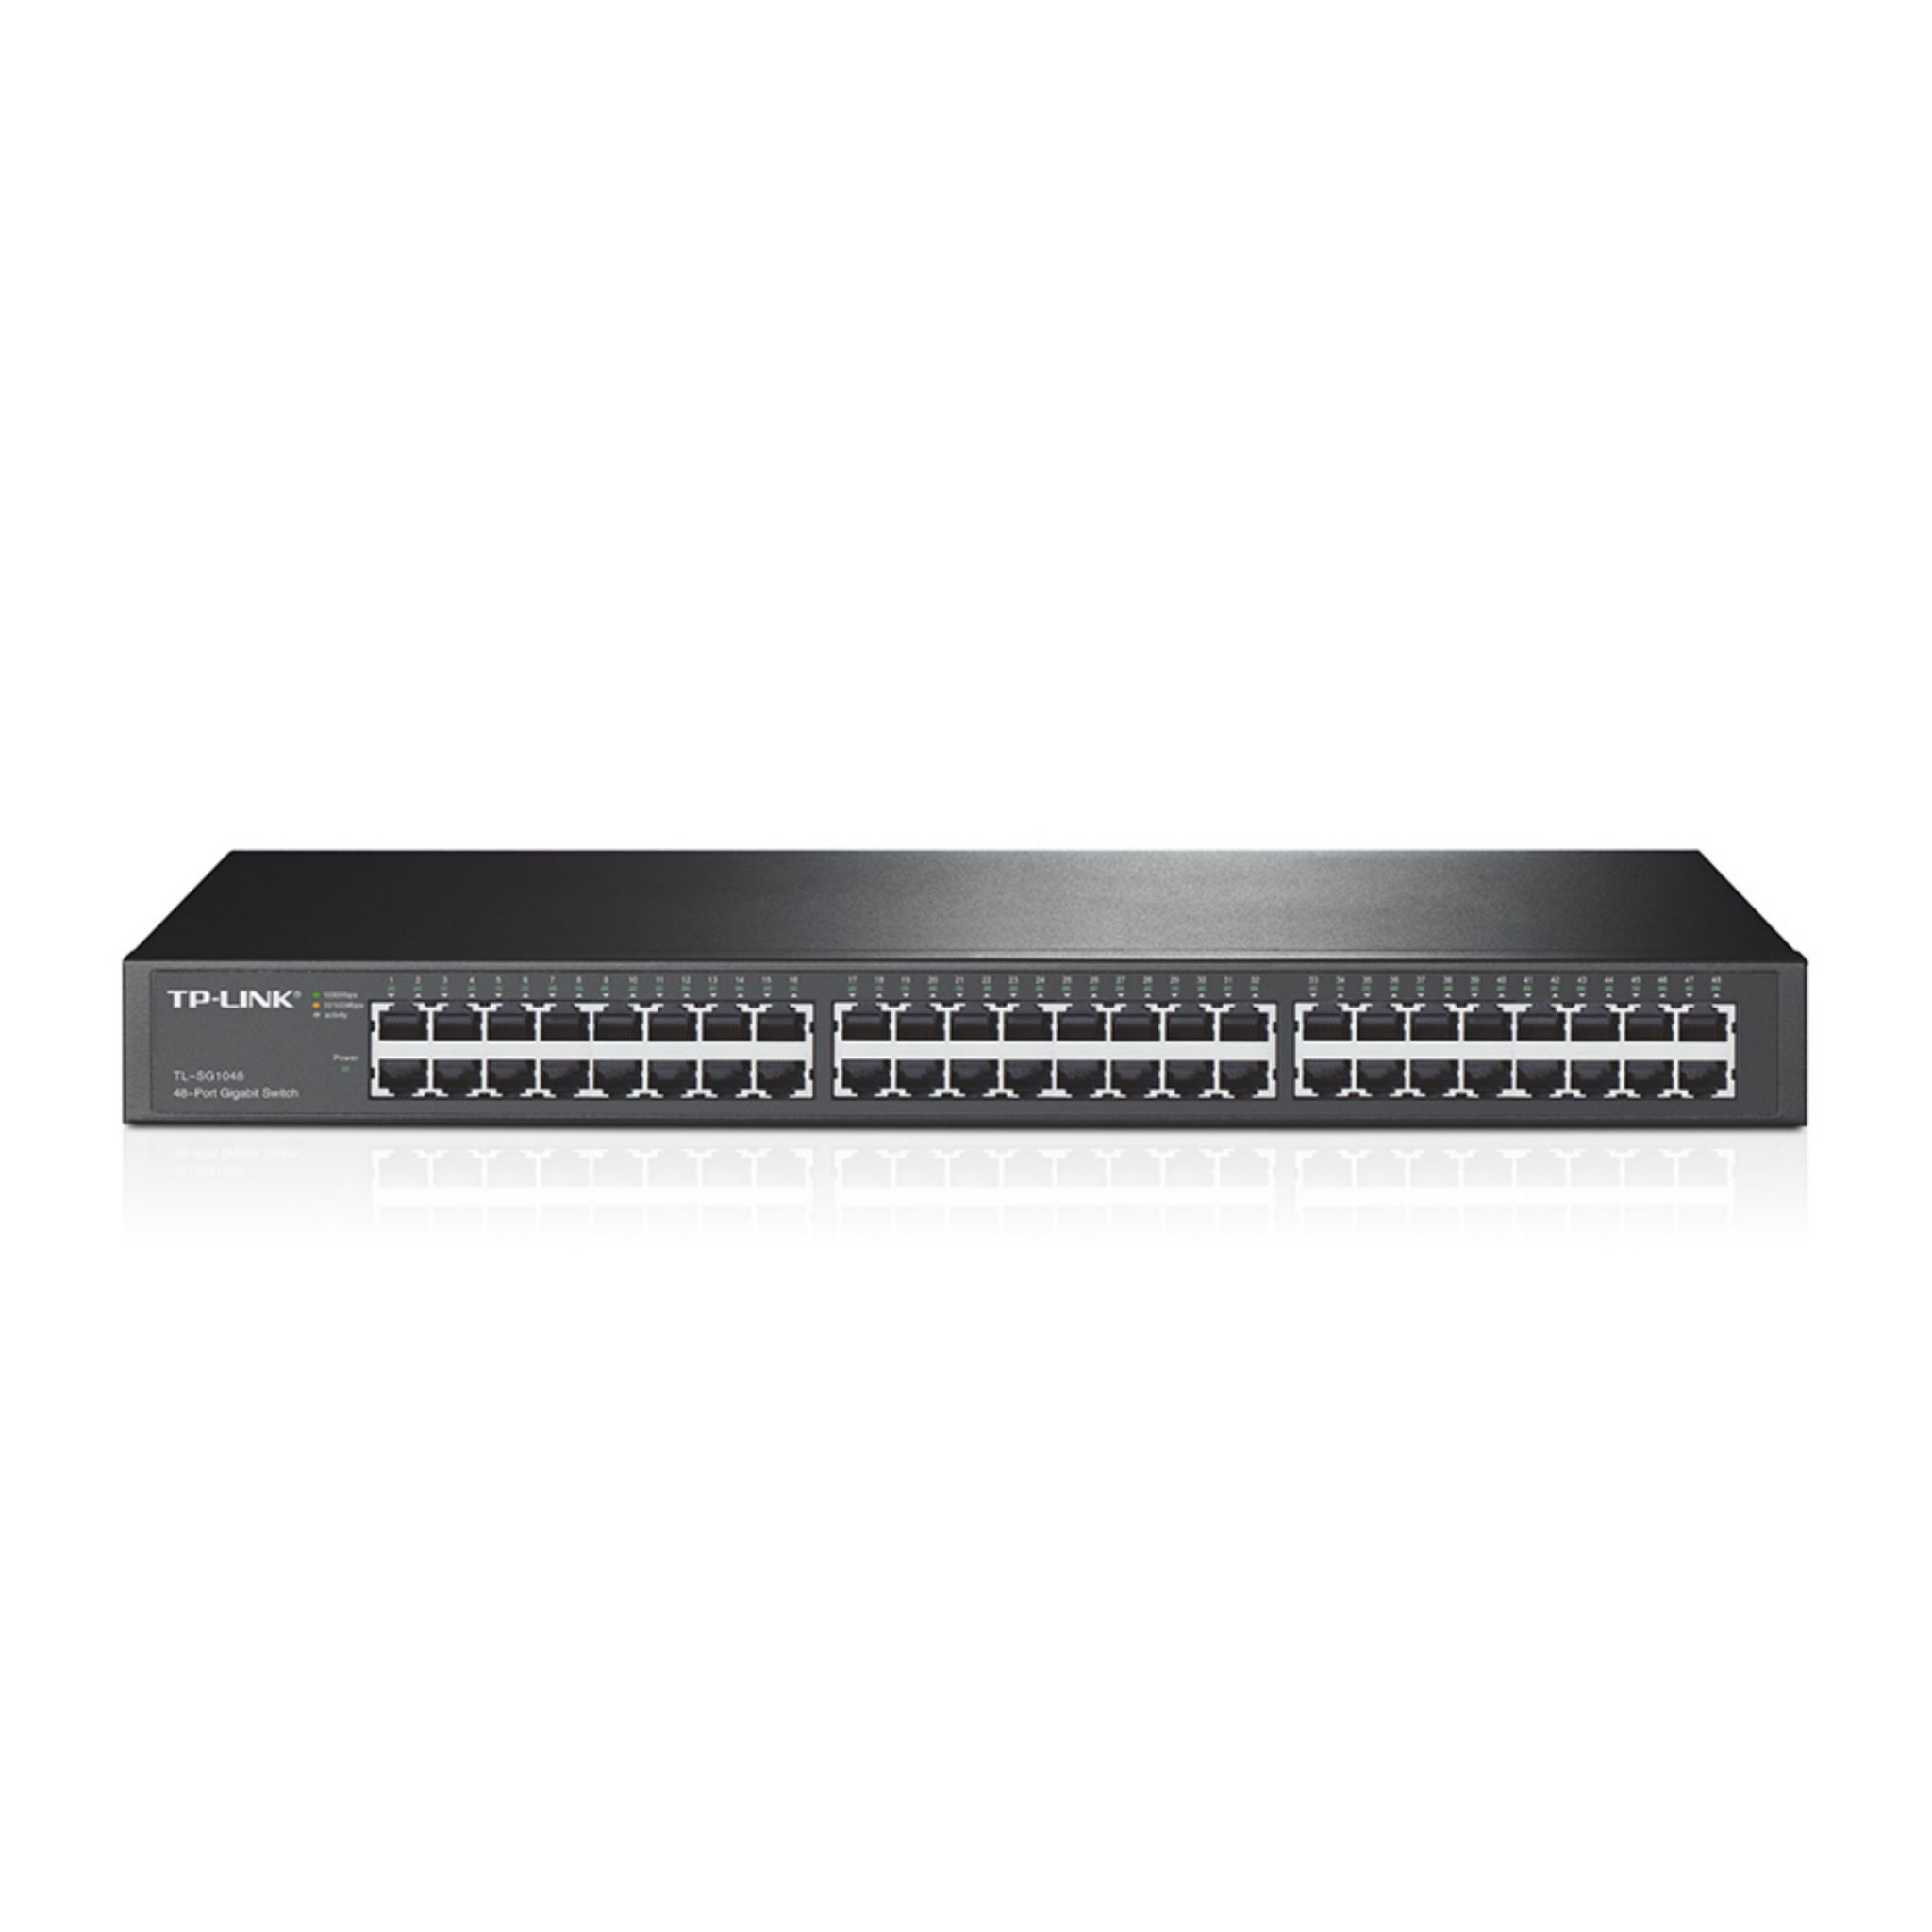 48 48-Port-Gigabit-Rackmount-Switch Switches TP-LINK TL-SG1048 unmanaged